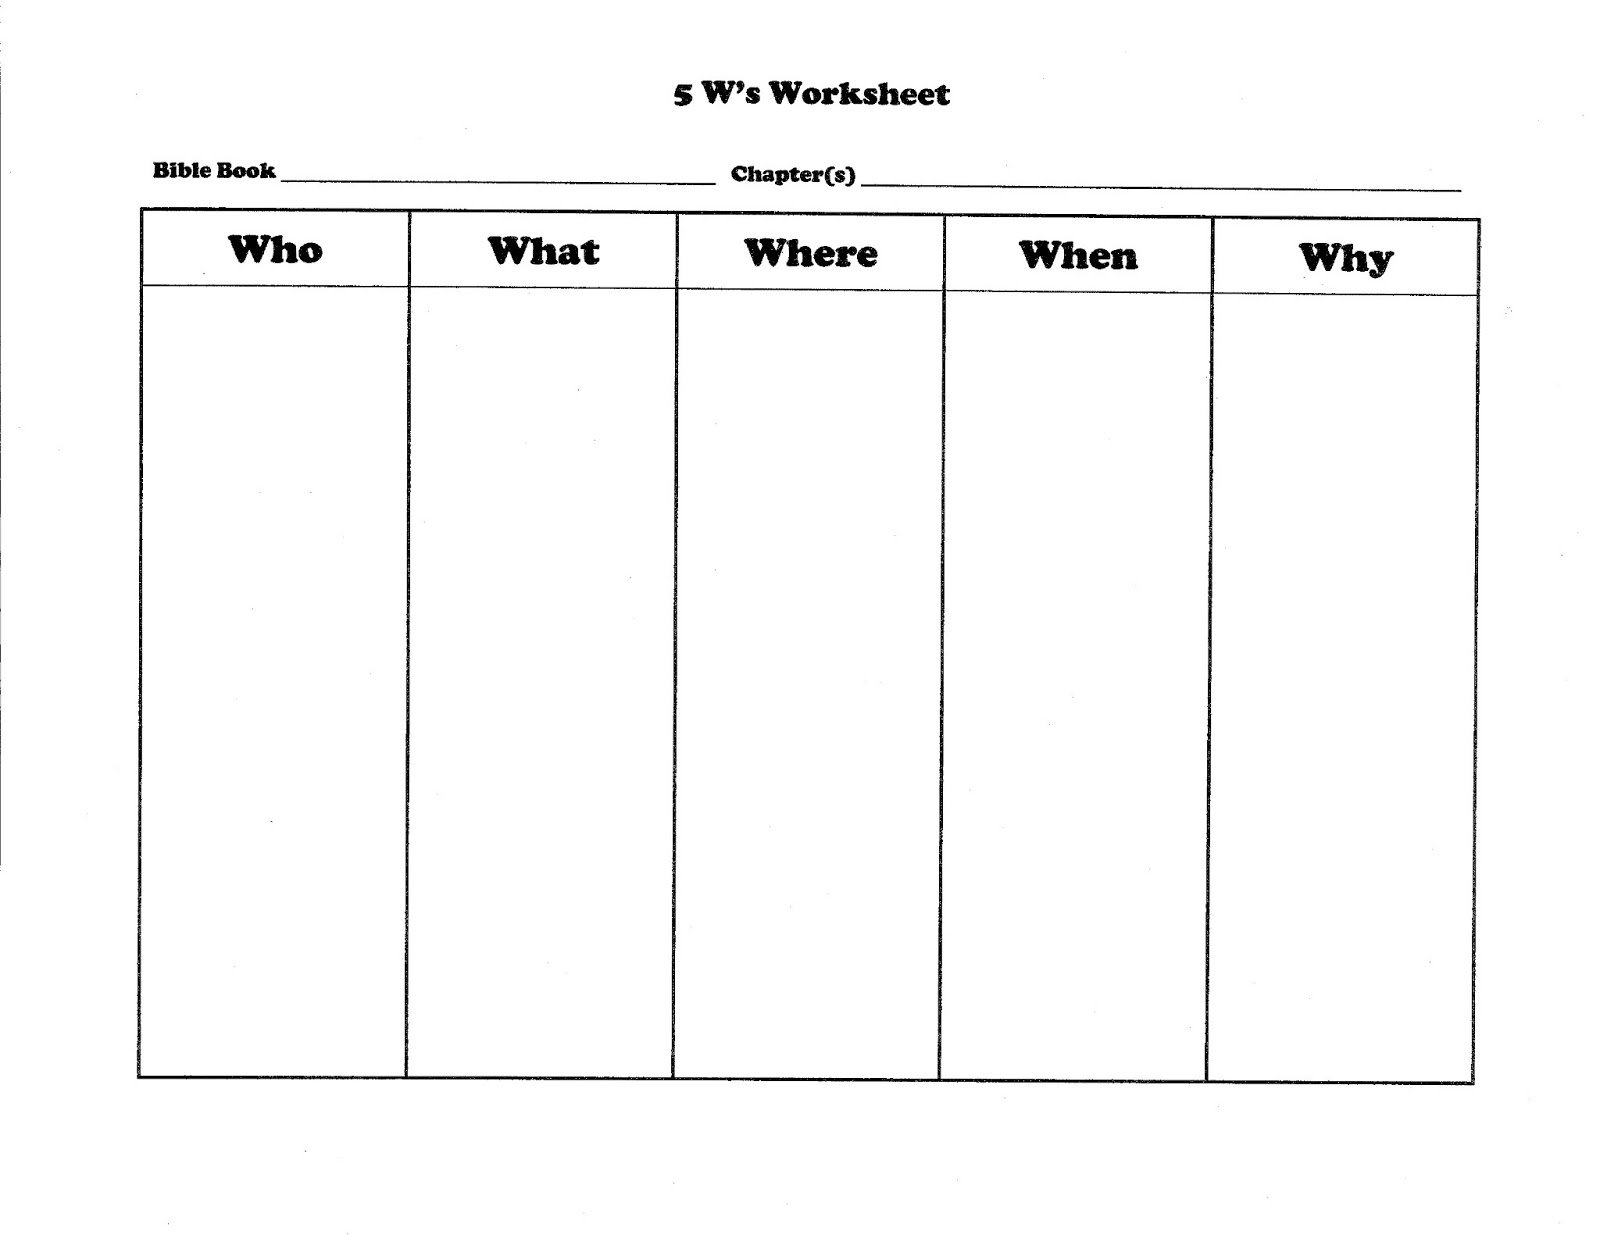 5 W S Worksheet The Best Worksheets Image Collection